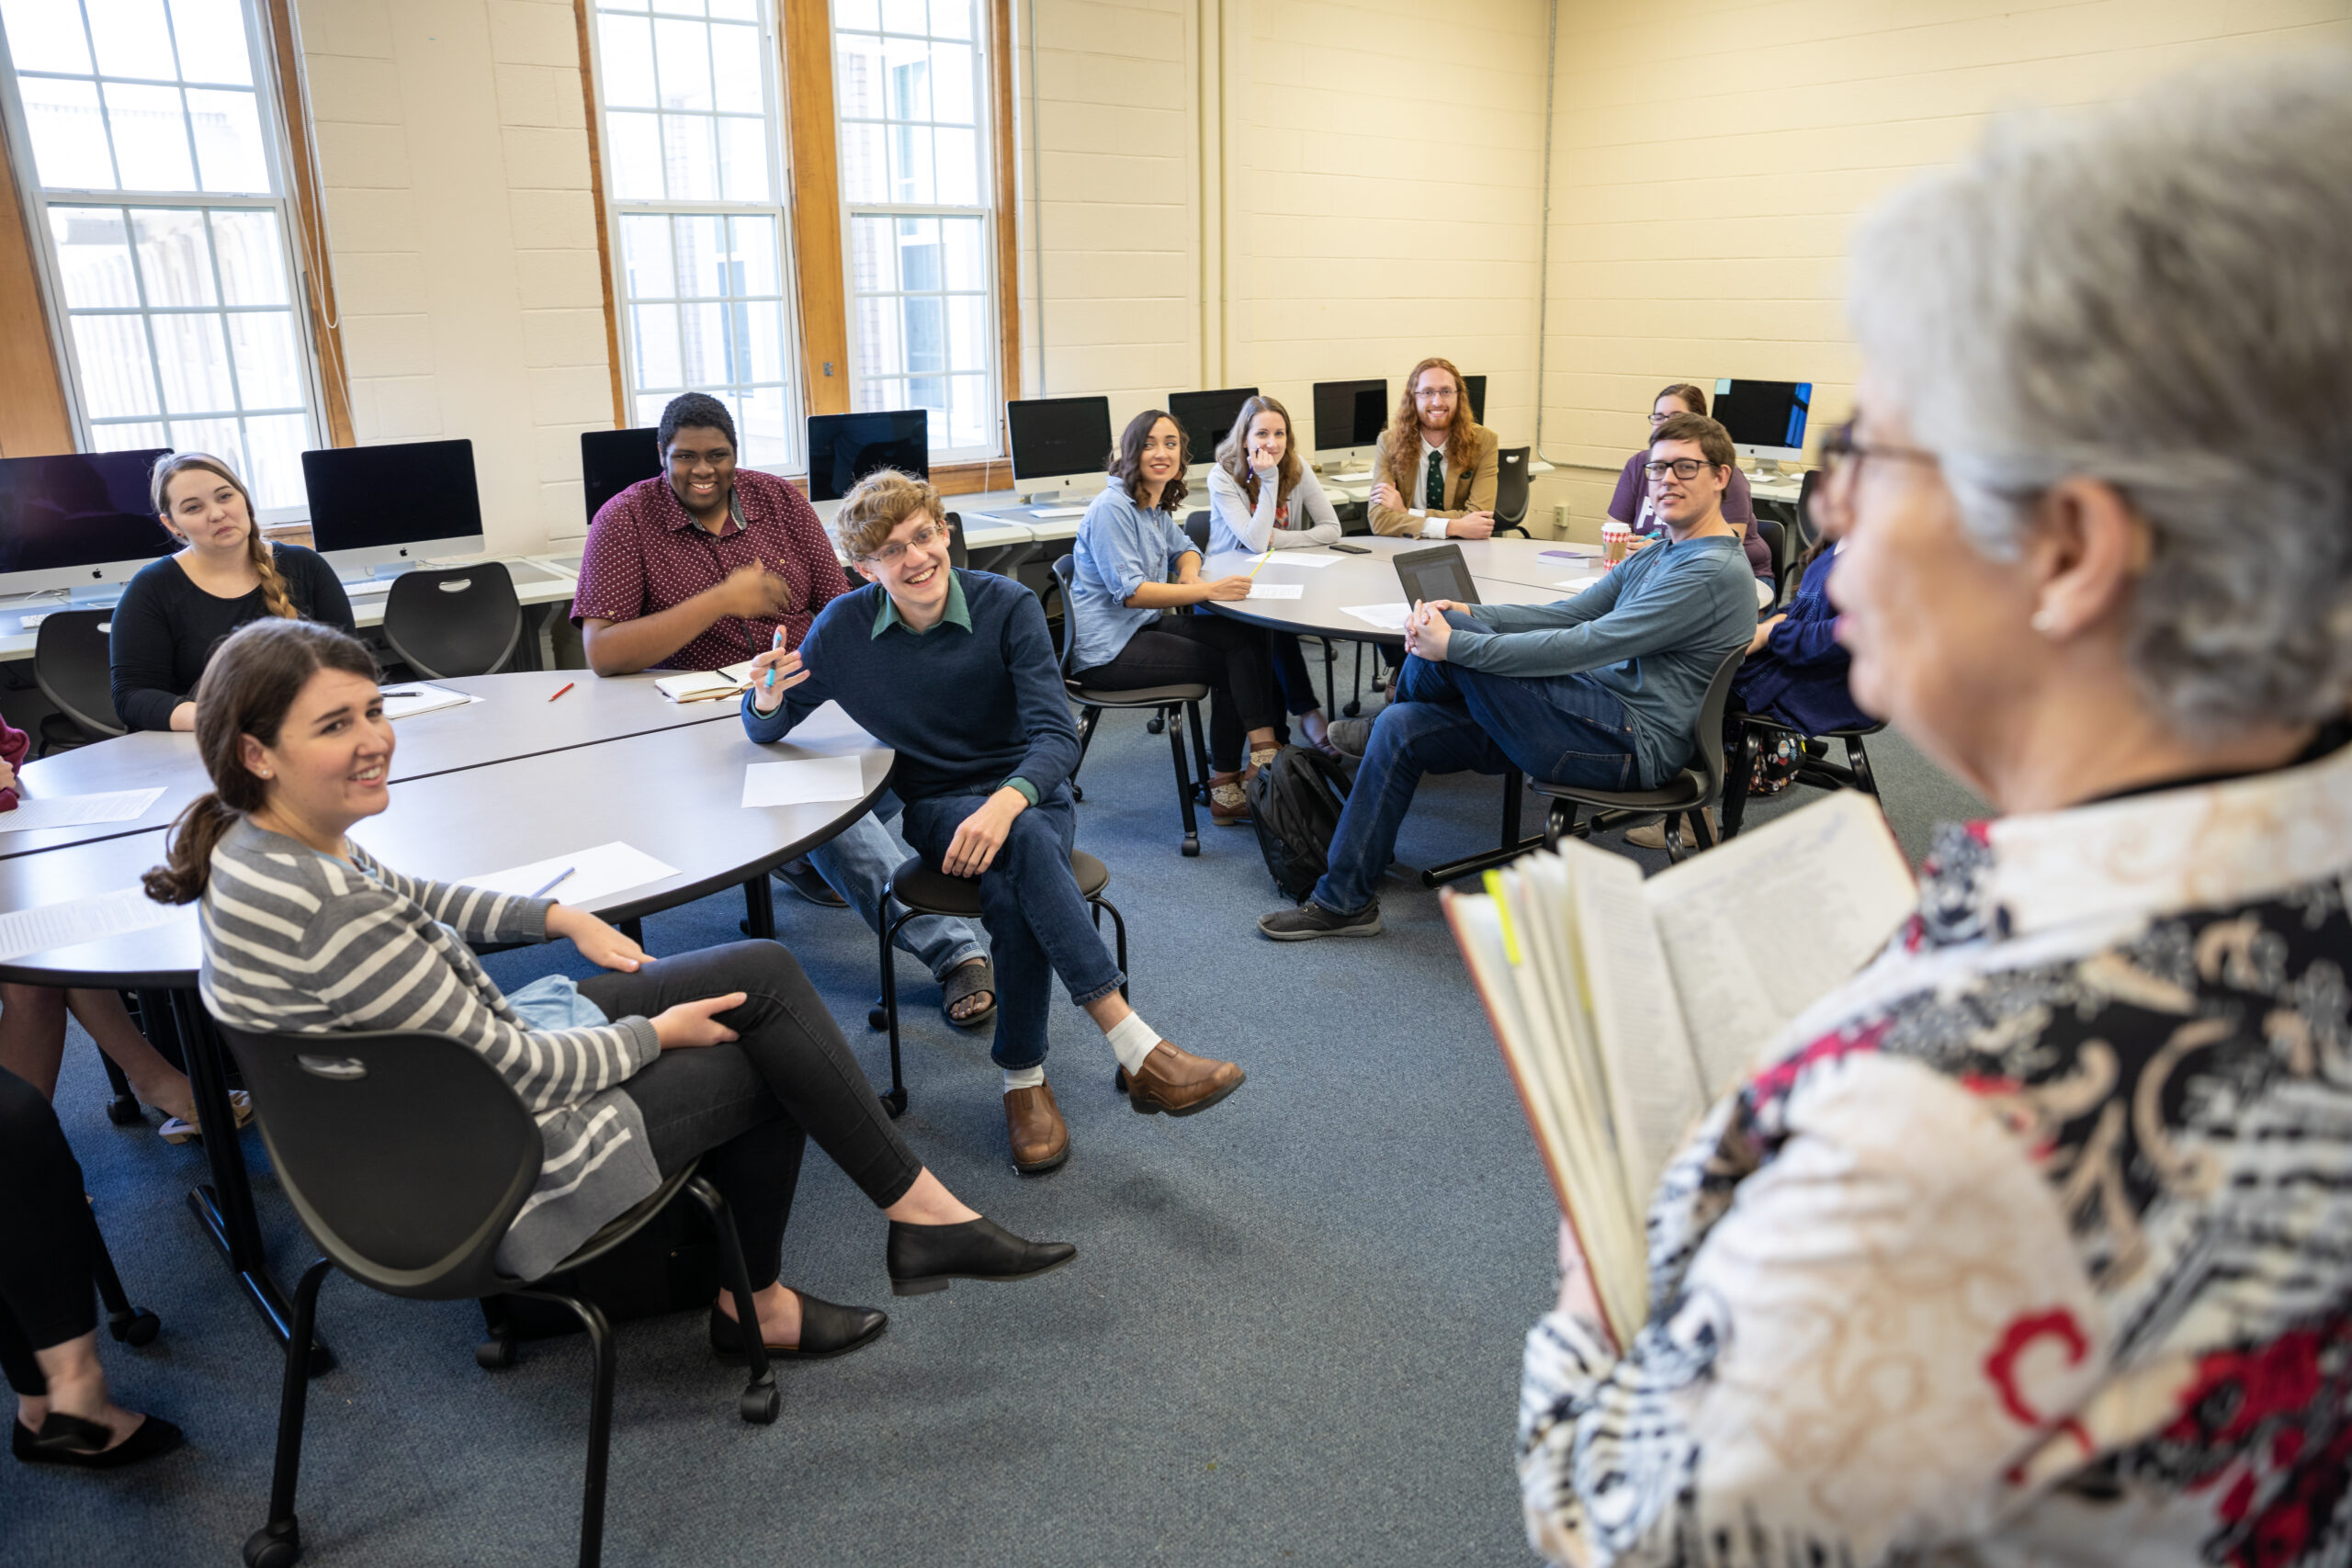 A professor holding an open book facing two groups of literature students